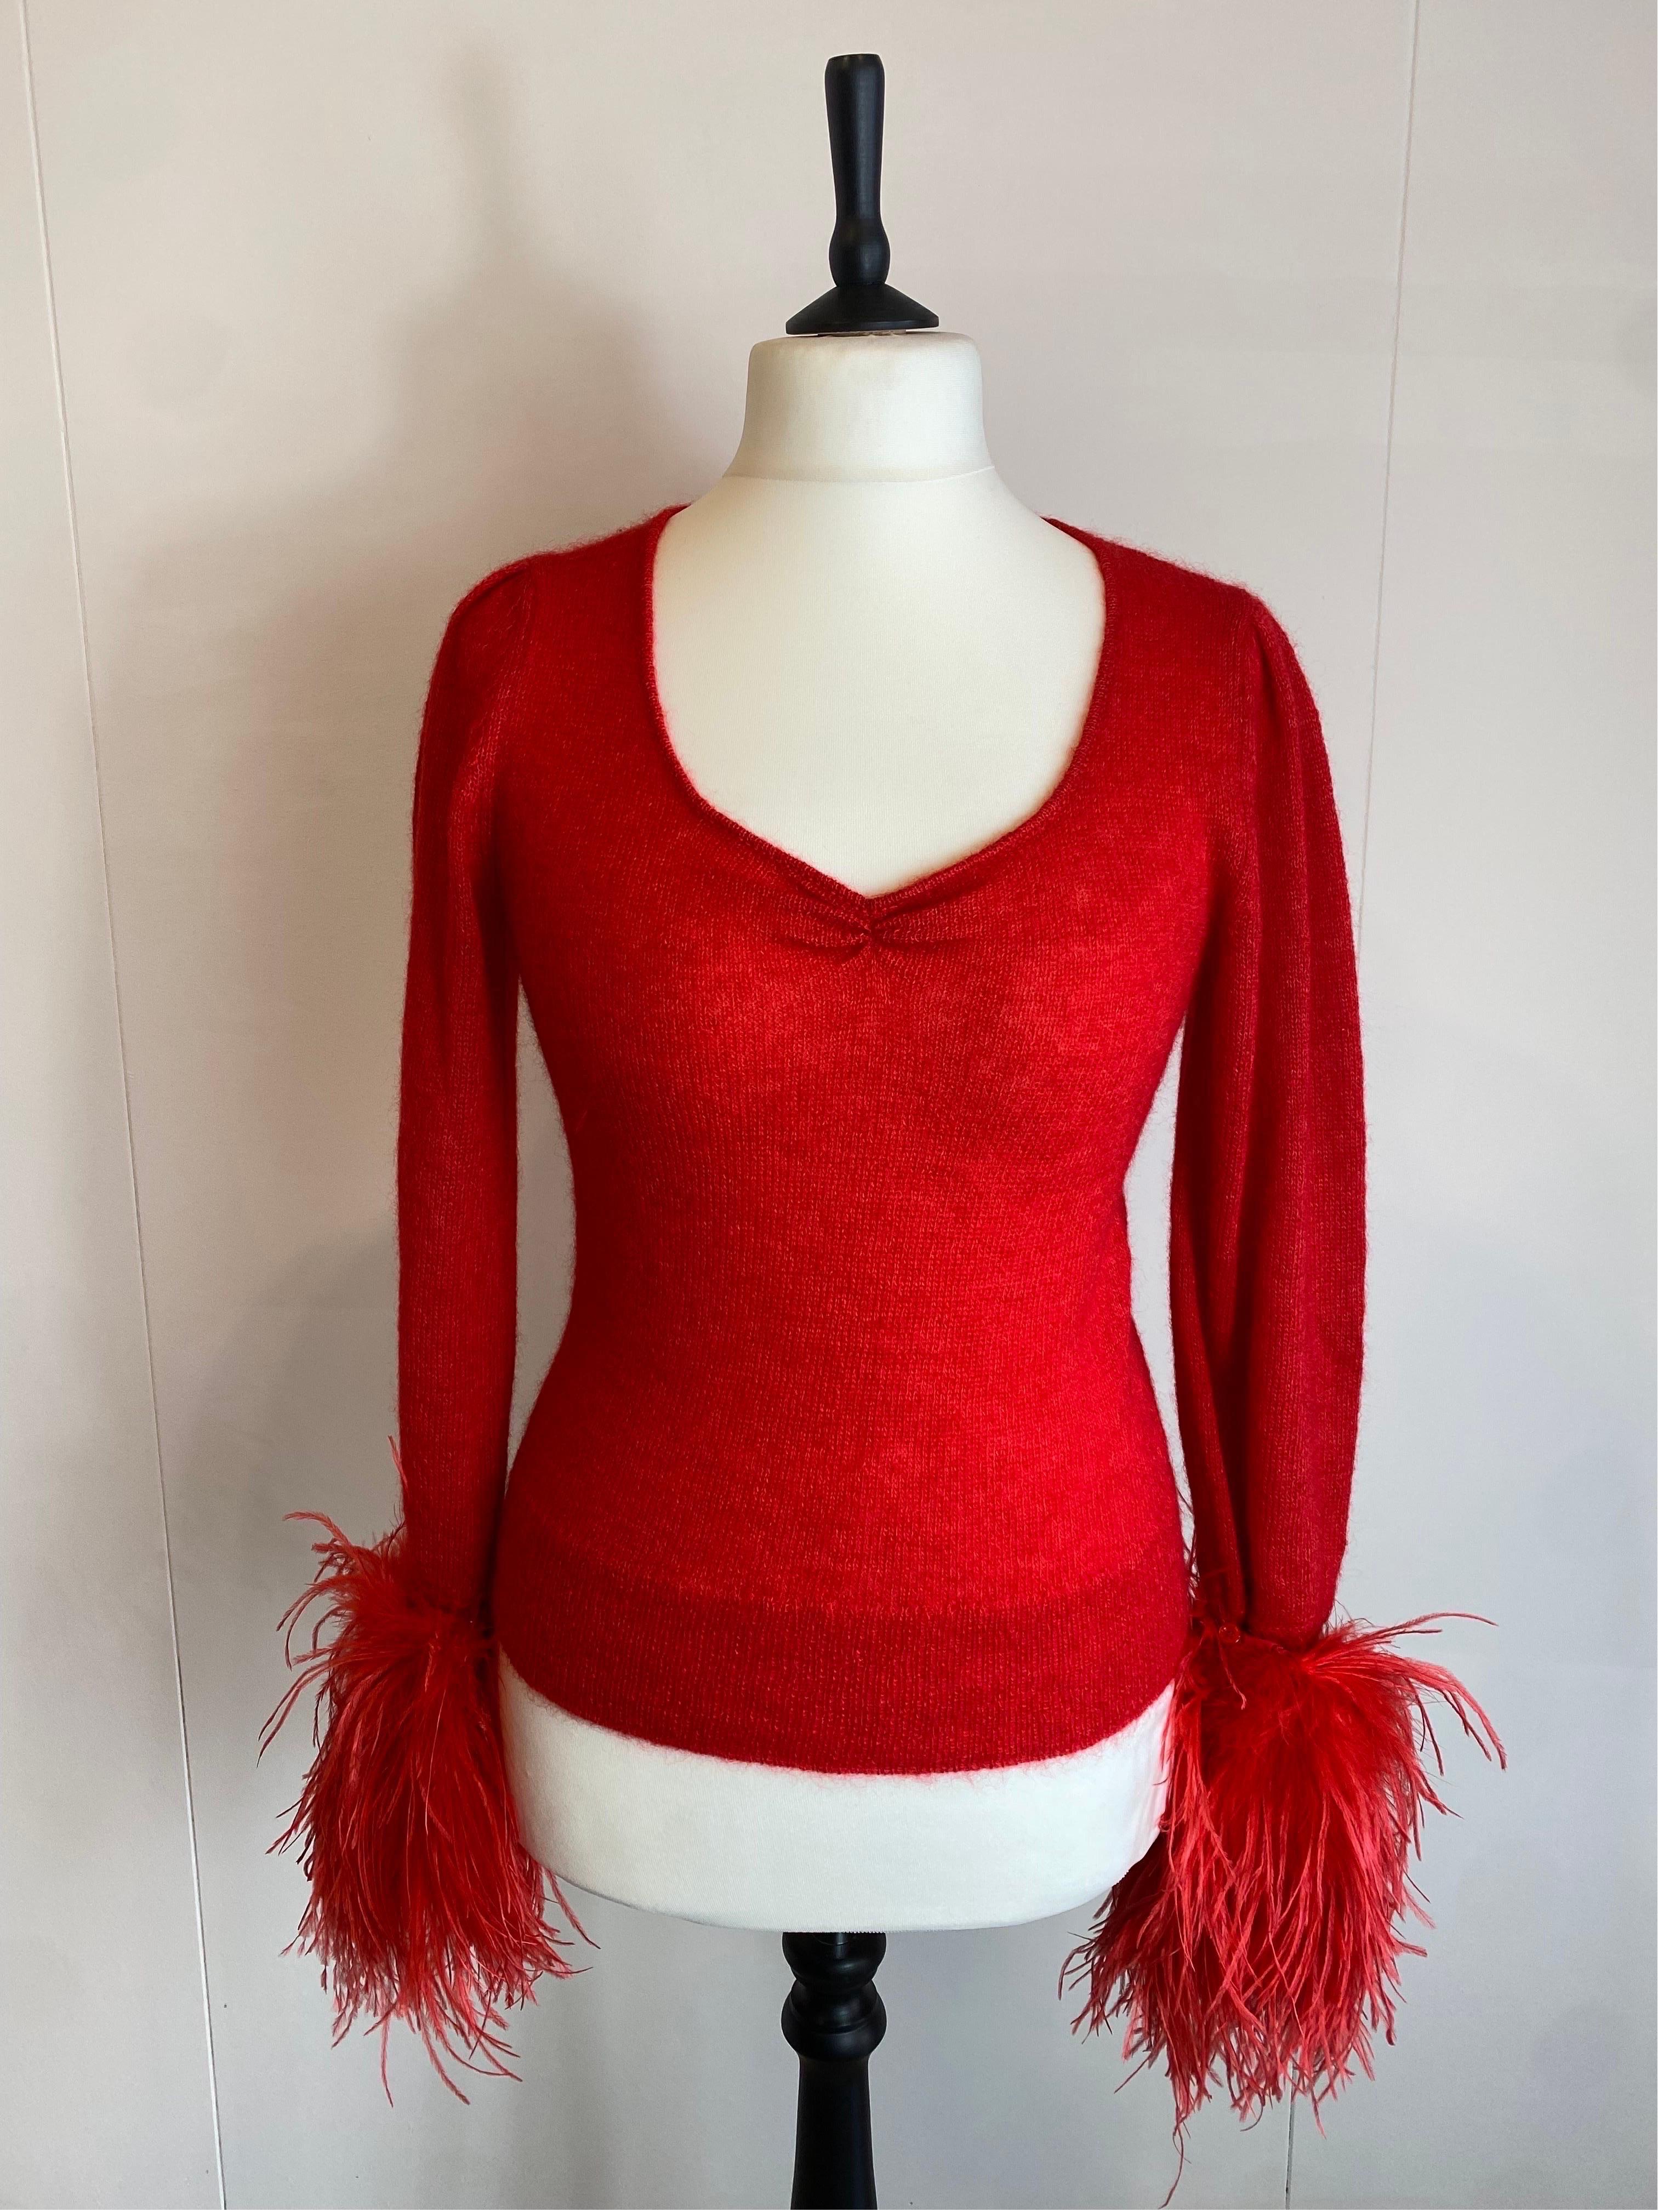 Gucci V neck sweater.
2020 collection.
In mohair, silk and wool. Feather detail on the sleeves which can be removed if desired.
Italian size 36
Shoulders 40 cm
Bust 40 cm
Length 59 cm
Sleeve 62 cm
New, with label.